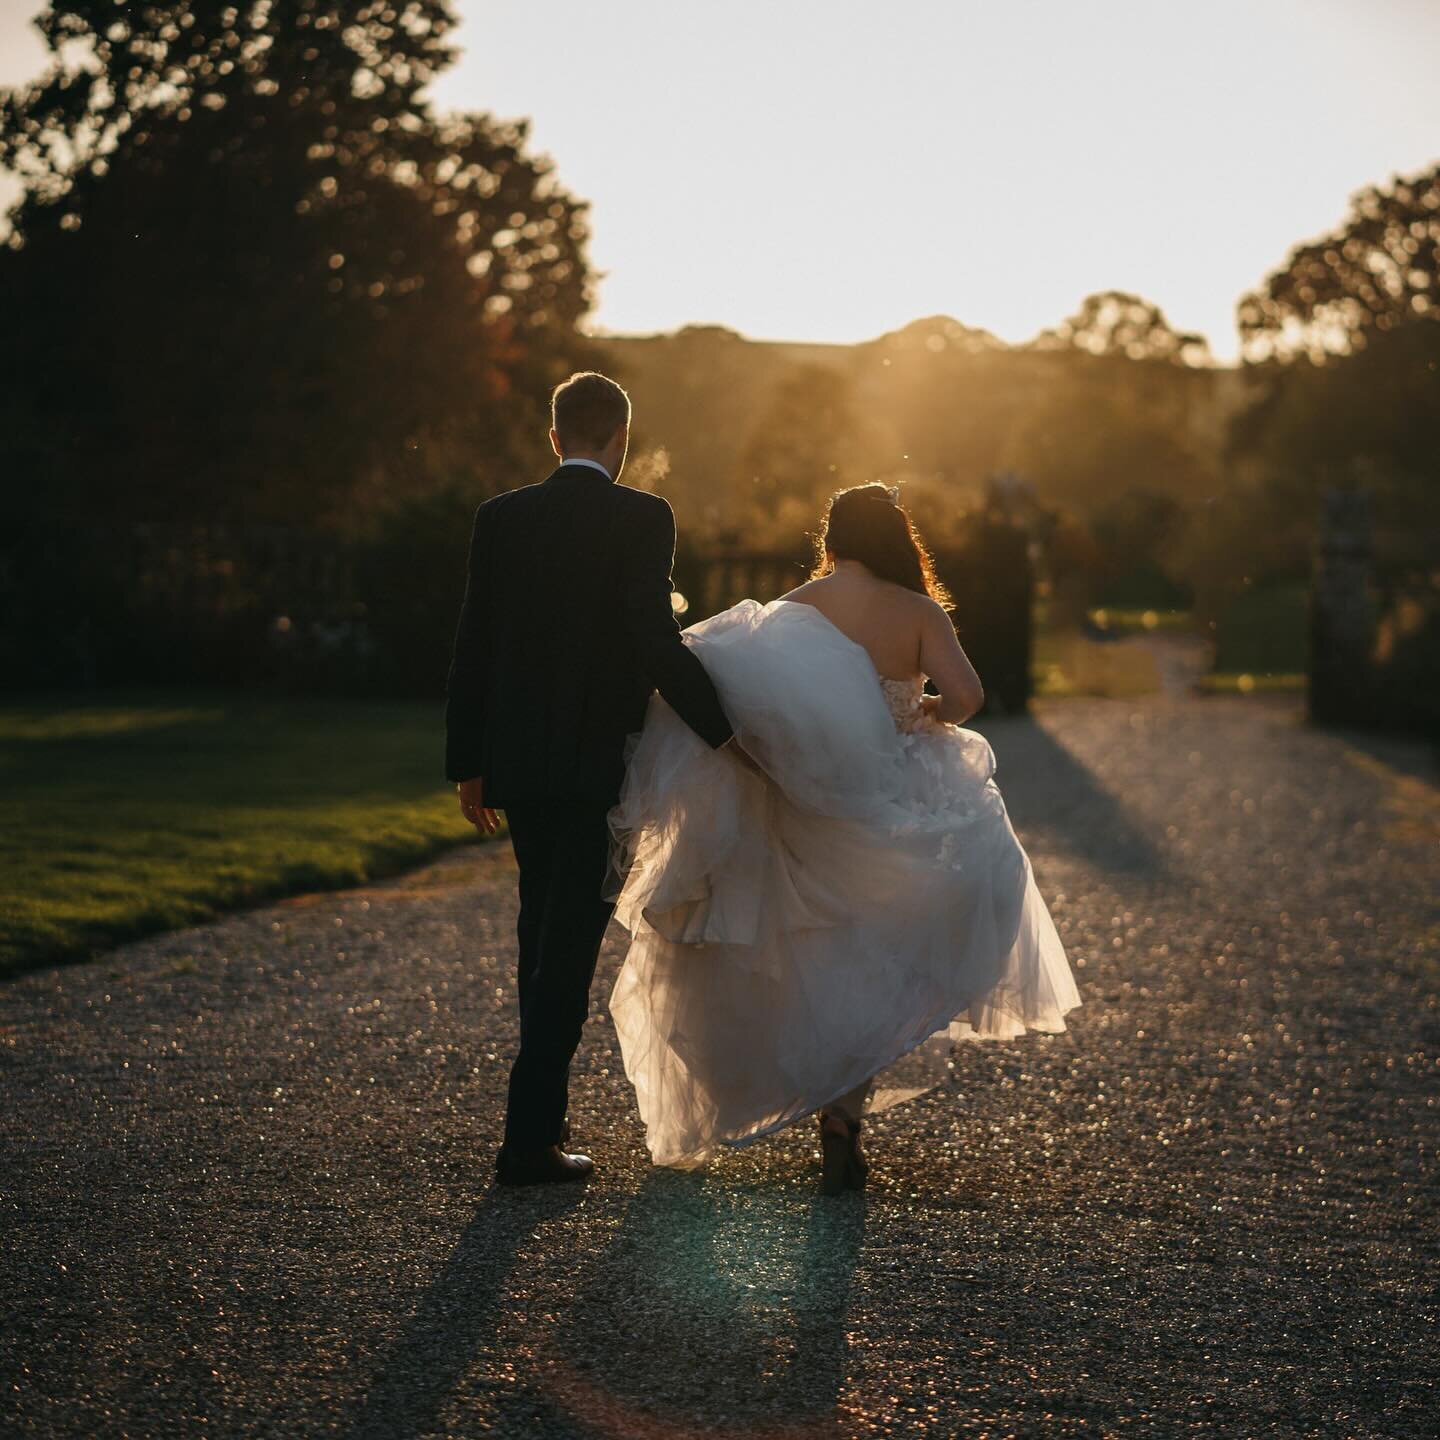 That summer evening light 😍☀️ I guess we&rsquo;re just missing the sun today? 🙈 So here&rsquo;s a throwback to a gorgeous summer evening 🧡

#summertime #summerlight #summerwedding #sunset #goldenhour #weddingday #brymptonhouse #brymptonhouseweddin